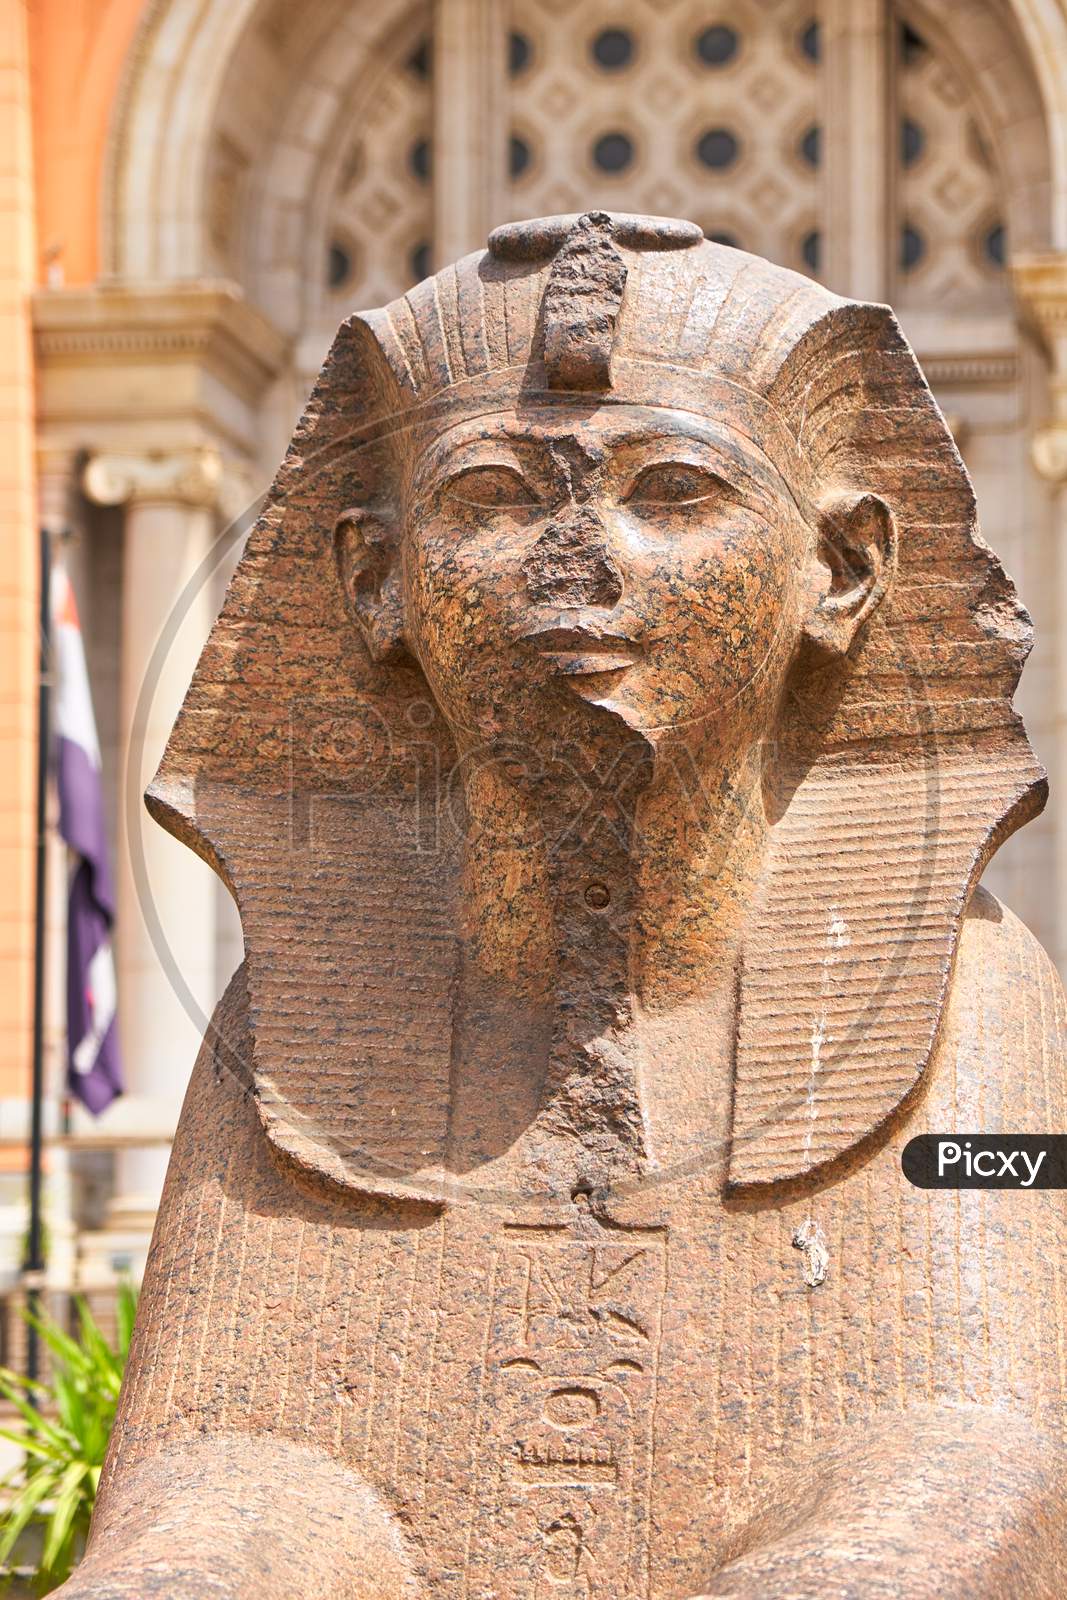 Egyptian Museum Which Houses The World'S Largest Collection Of Ancient Egyptian Antiquities In Cairo